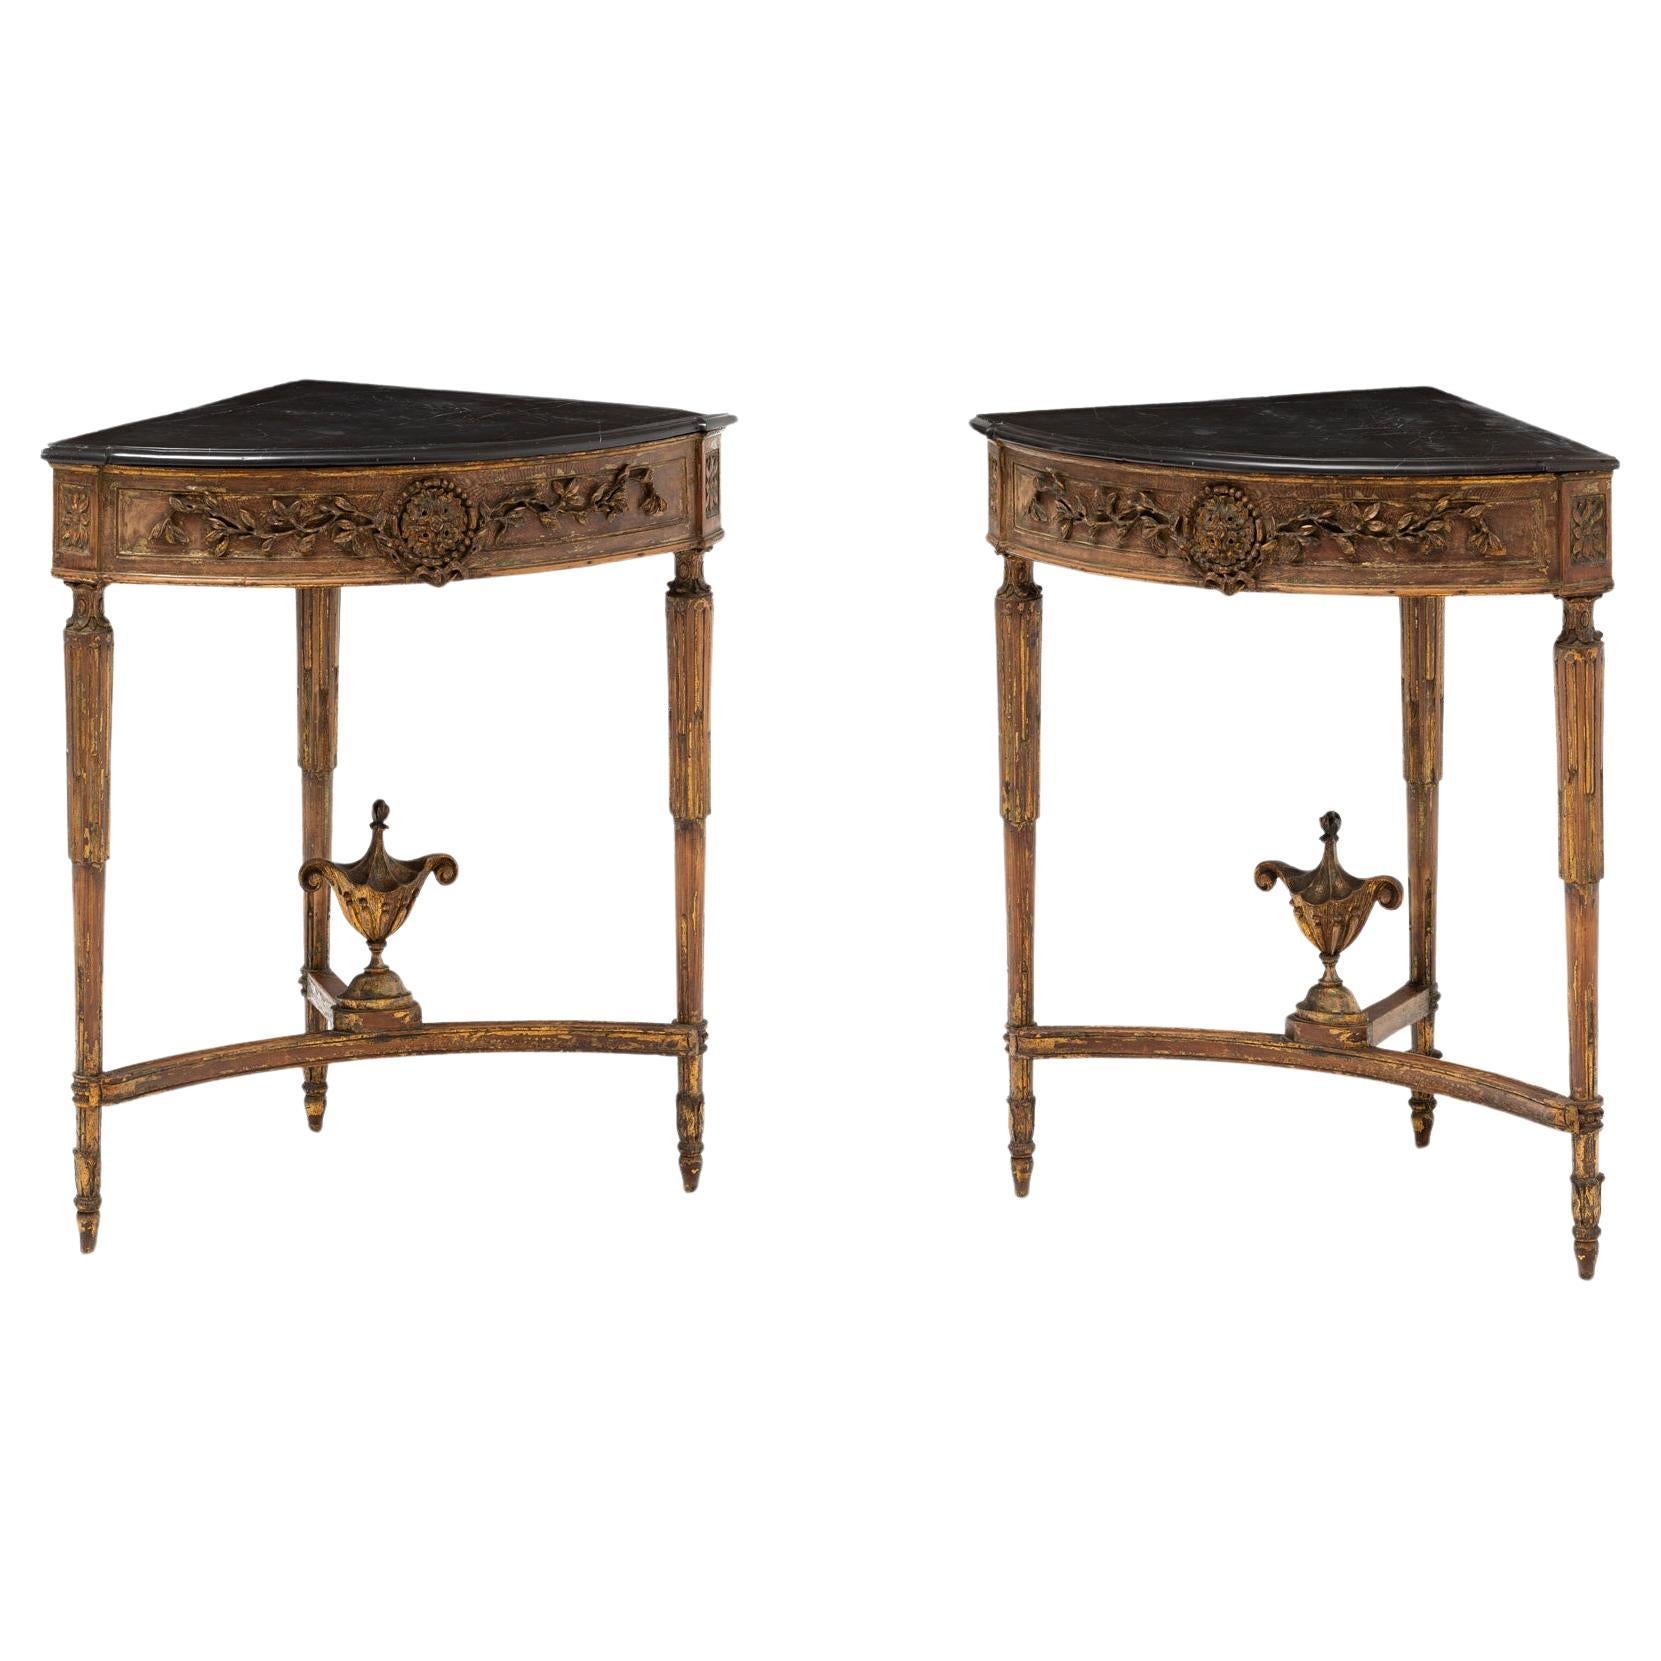 Pair of Louis XVI Style Corner Tables, Portugal 19th Century by Lucien Donnat For Sale